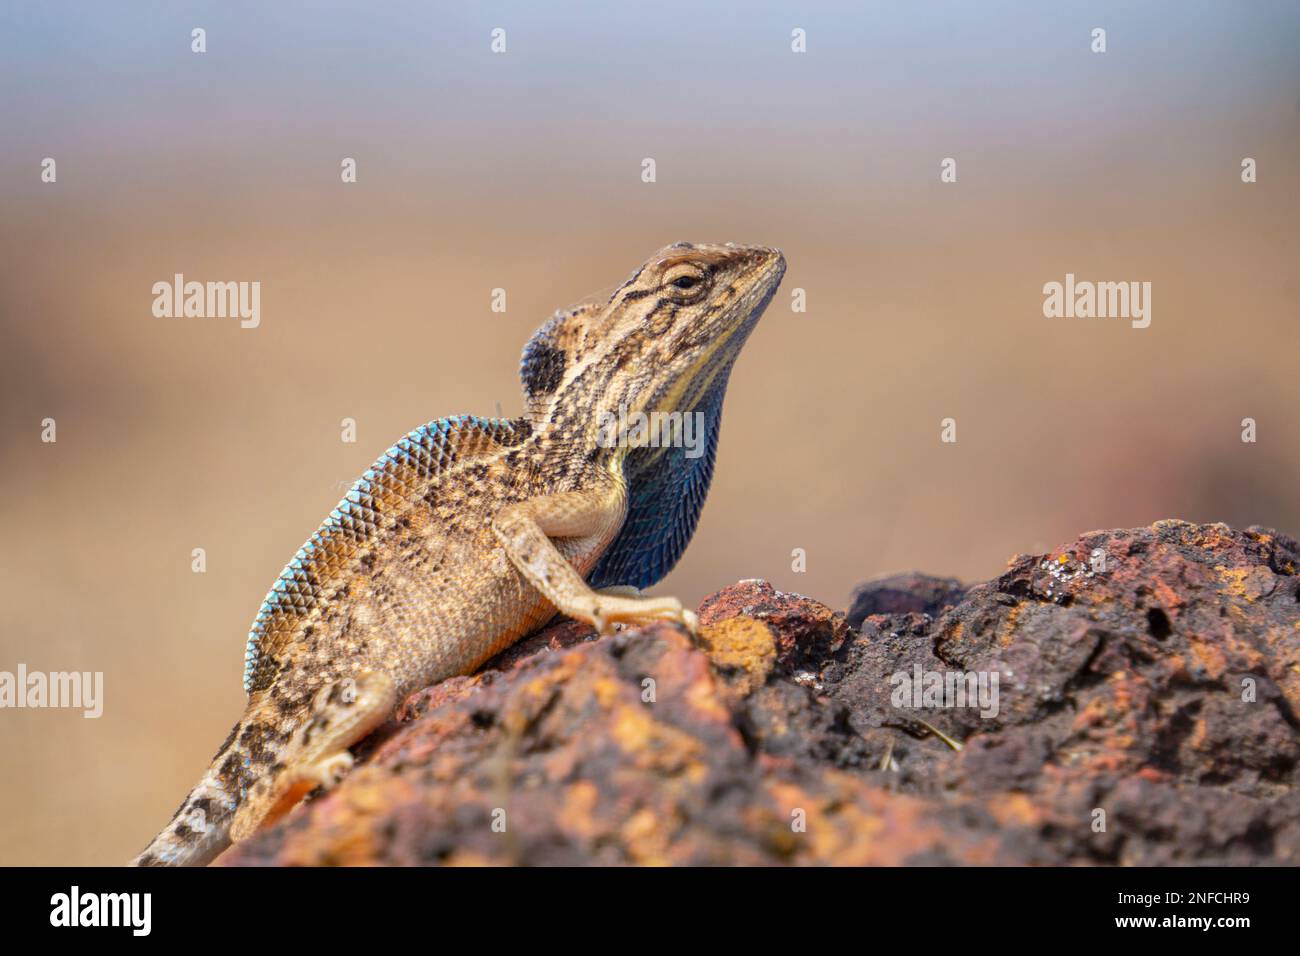 Sarada superba, the superb large fan-throated lizard, is a species of agamid lizard found in Maharashtra, India. It was described in 2016 and in the p Stock Photo